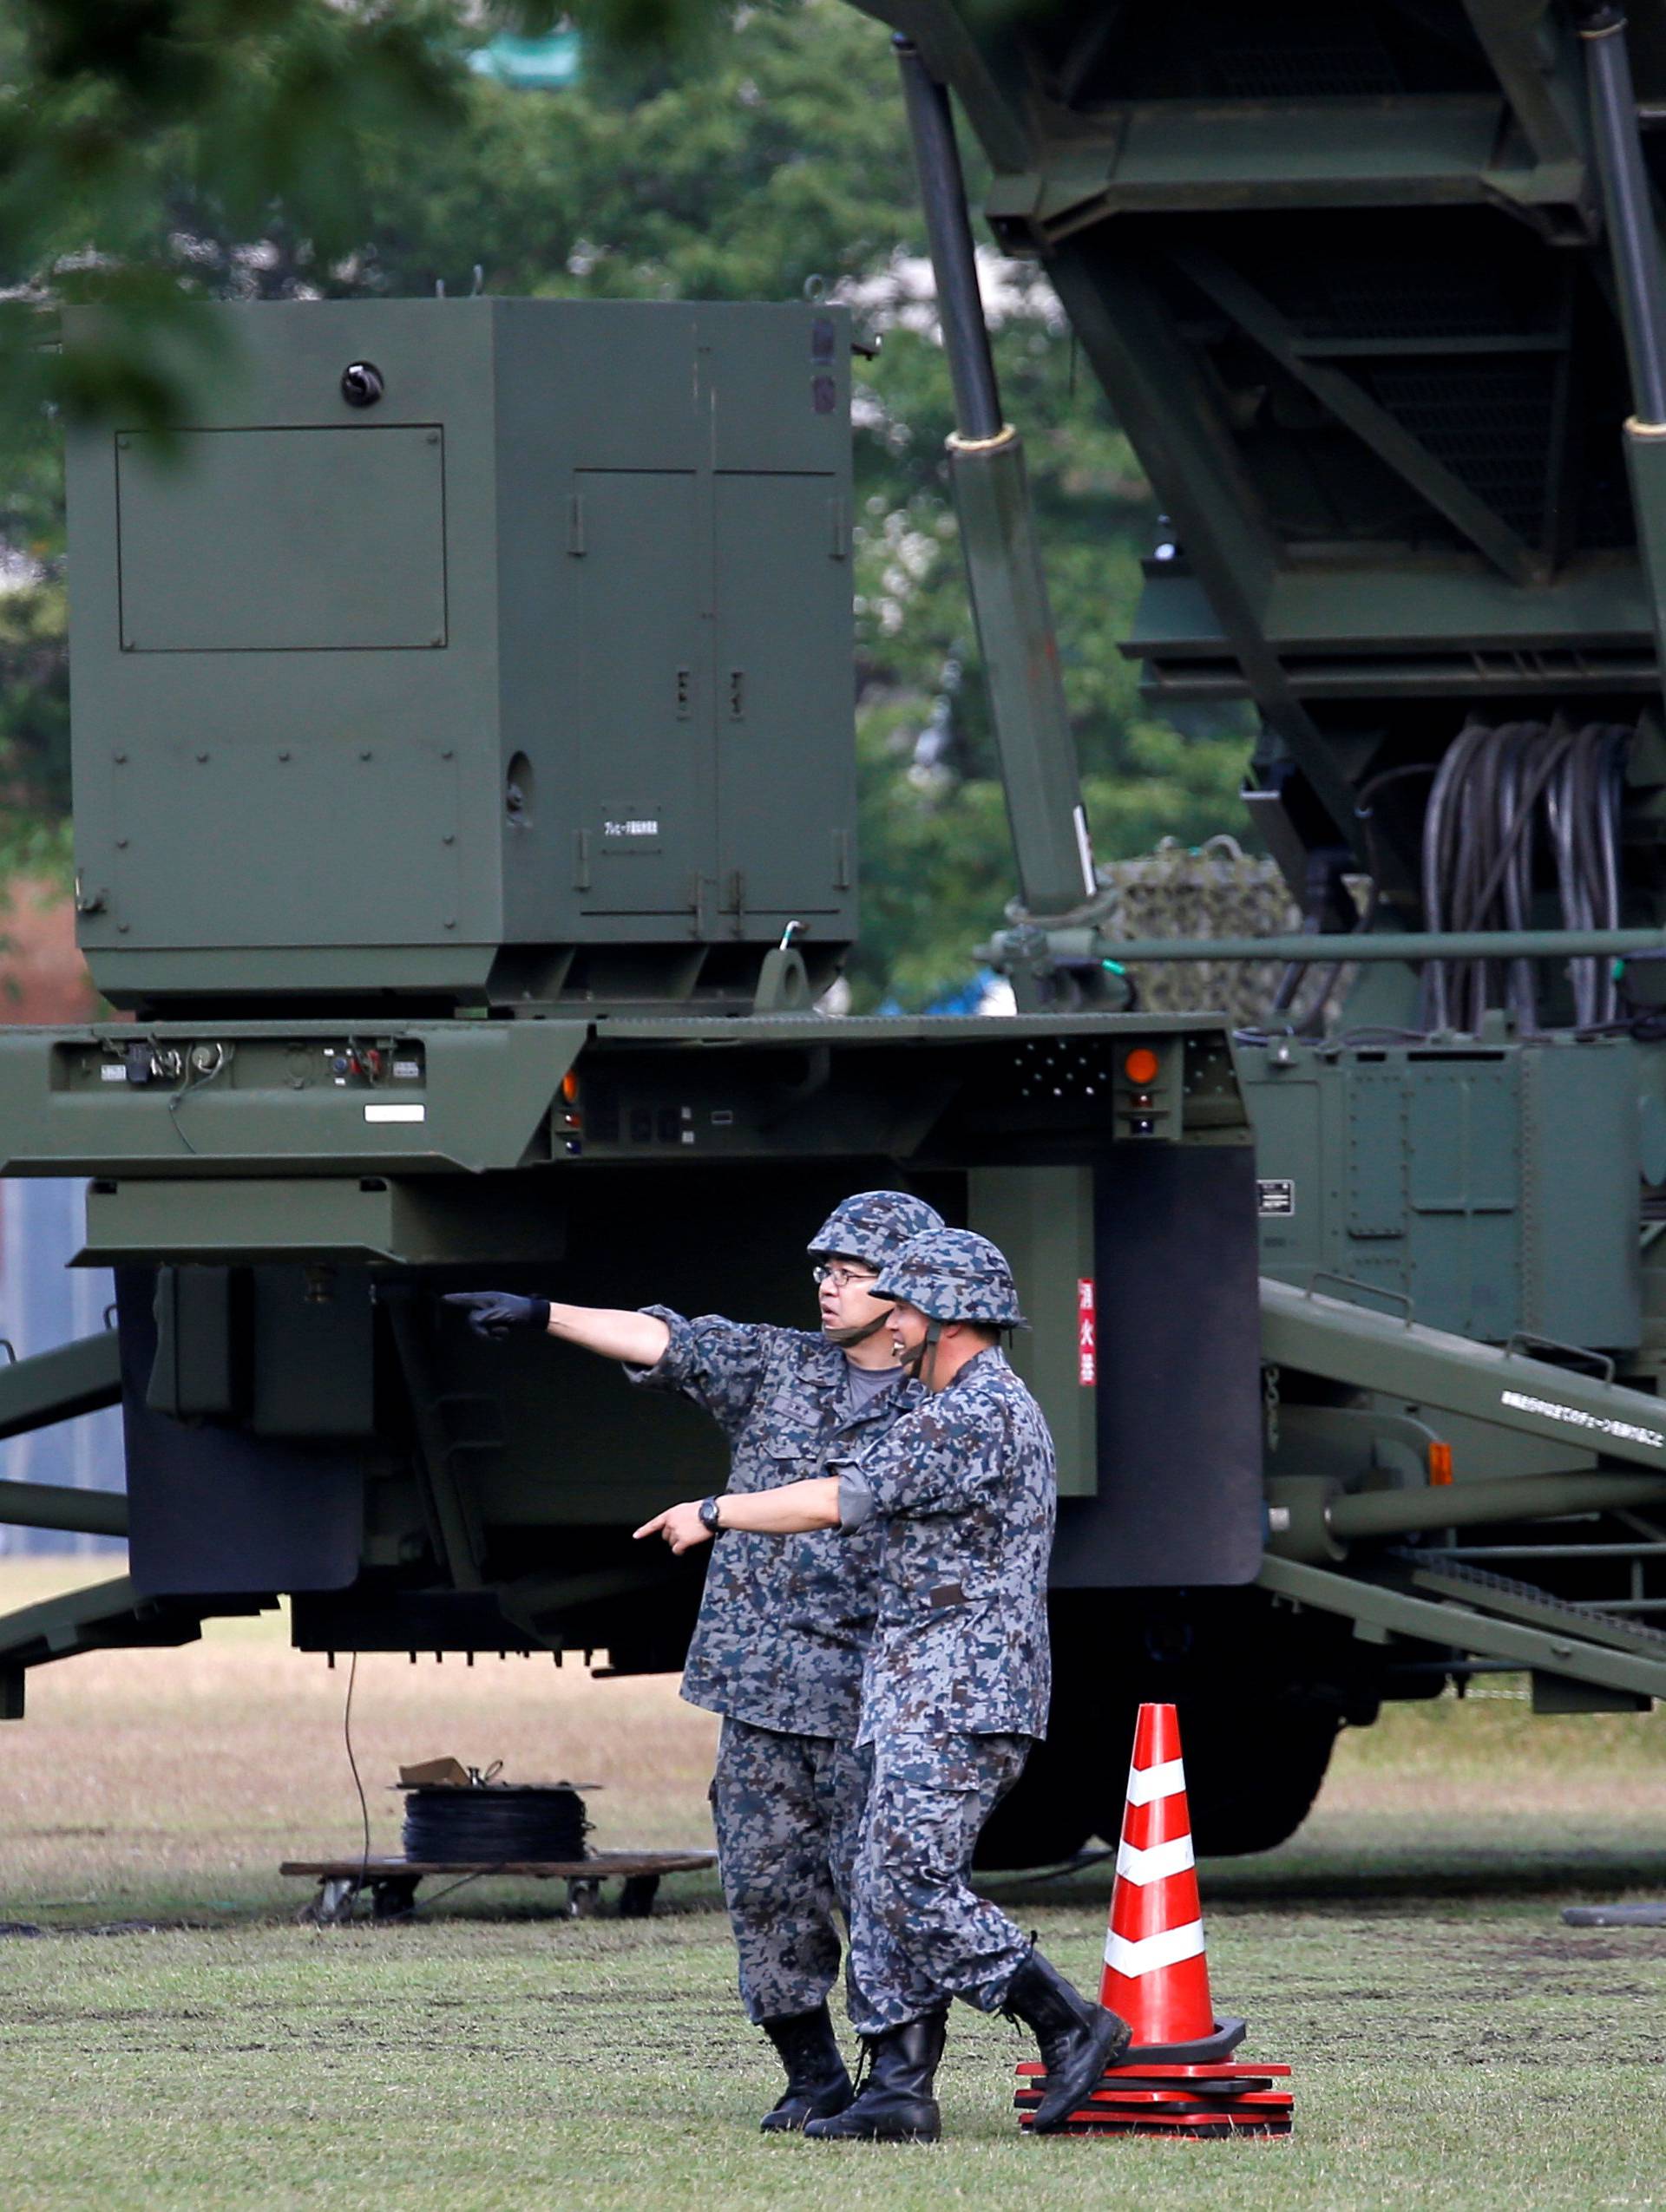 Japan Self-Defense Forces soldiers are seen next to unit of Patriot Advanced Capability-3 (PAC-3) missiles at the Defense Ministry in Tokyo, Japan